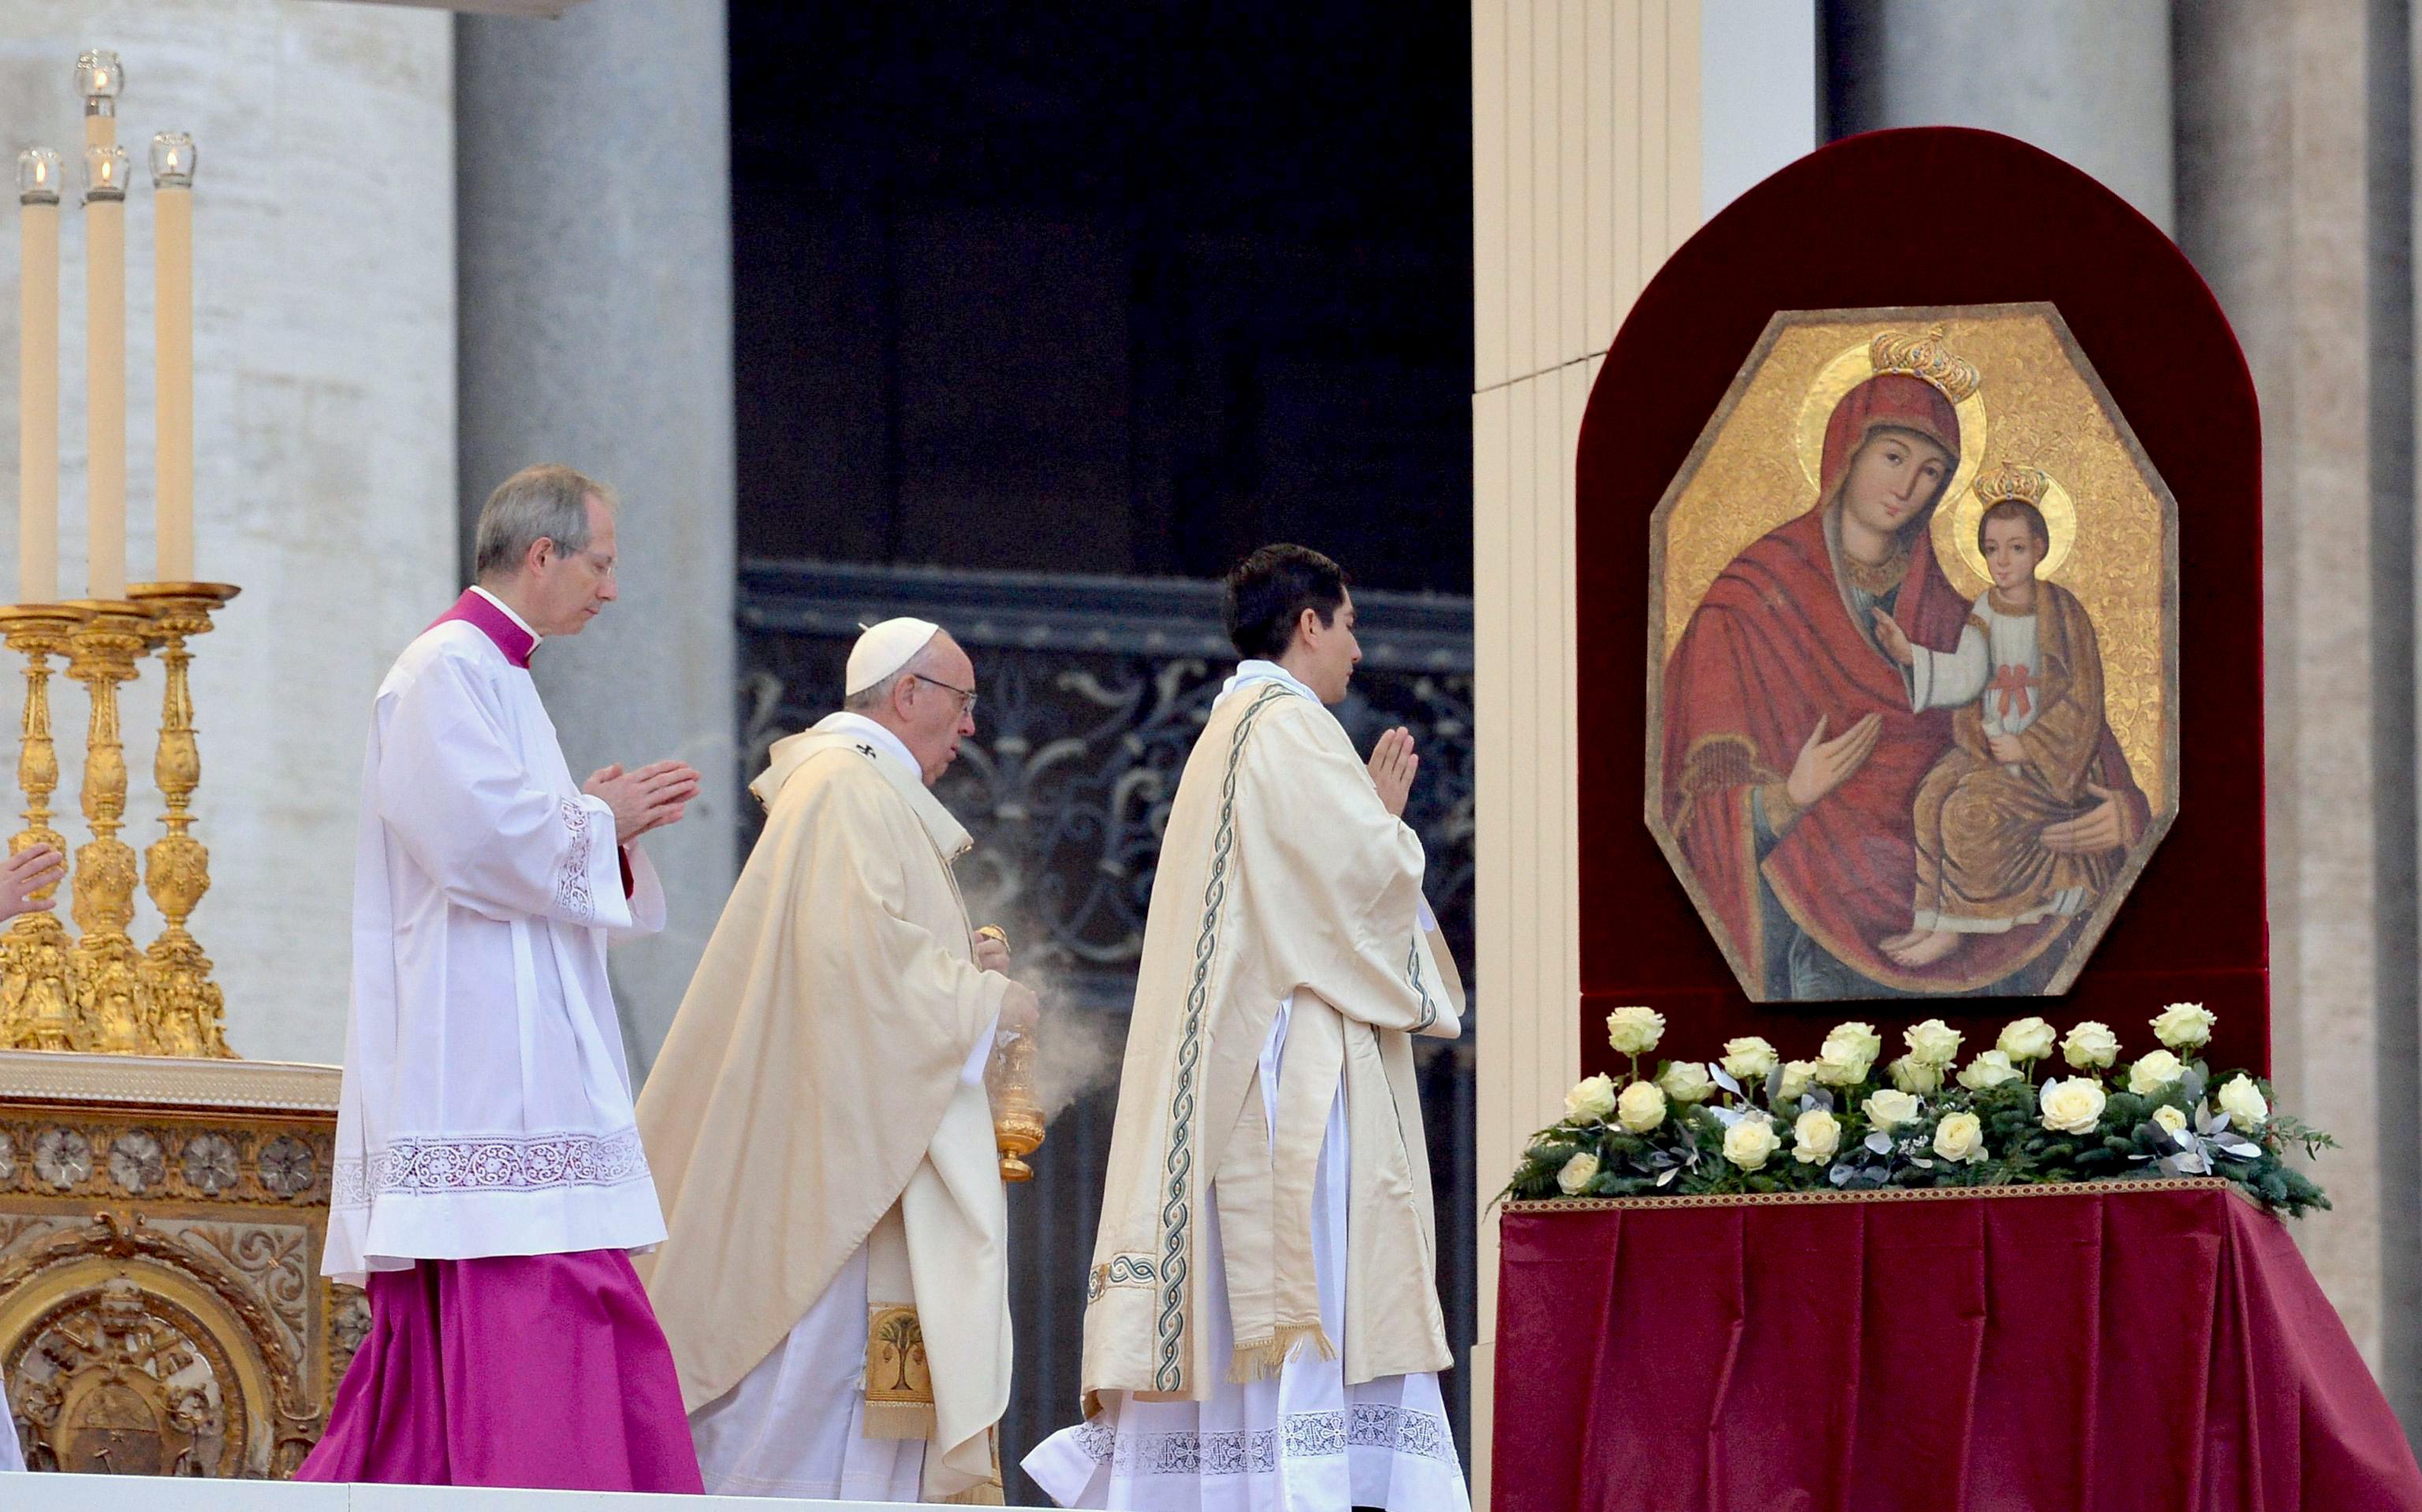 Pope Francis celebrates a Mass prior to the opening of the Holy Door of Saint Peter's Basilica